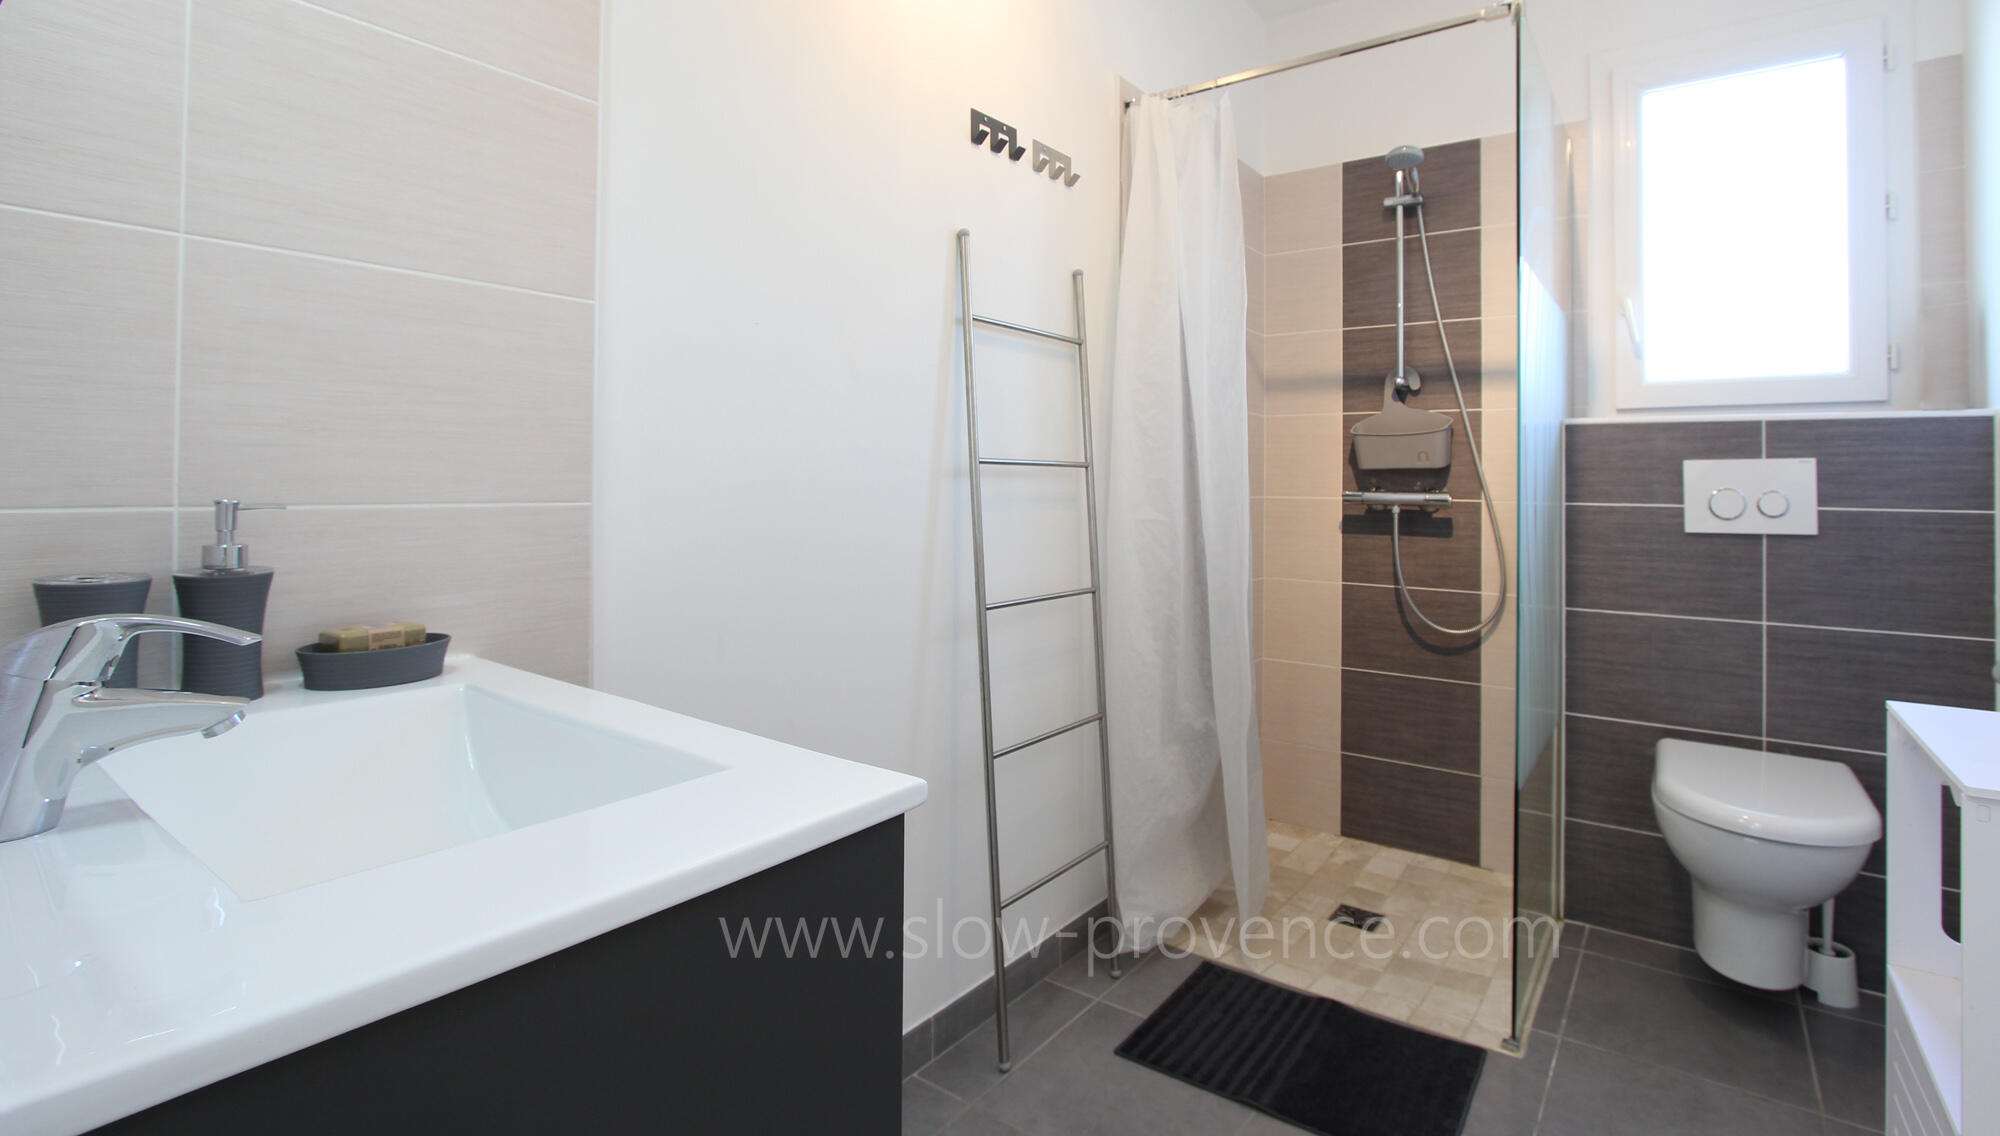 Shared bathroom for Bedrooms 1-2